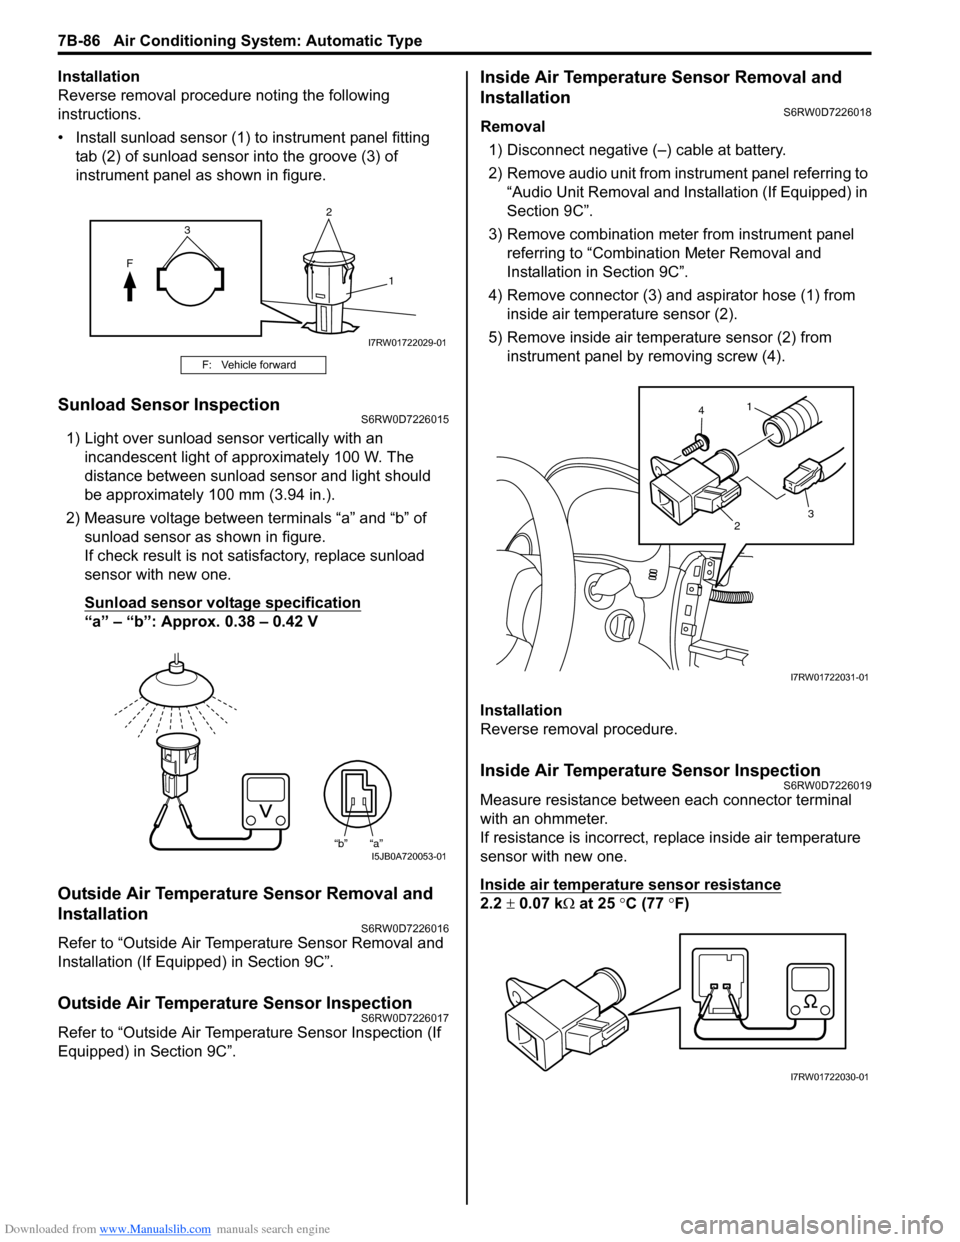 SUZUKI SX4 2006 1.G Service Workshop Manual Downloaded from www.Manualslib.com manuals search engine 7B-86 Air Conditioning System: Automatic Type
Installation
Reverse removal procedure noting the following 
instructions.
• Install sunload se